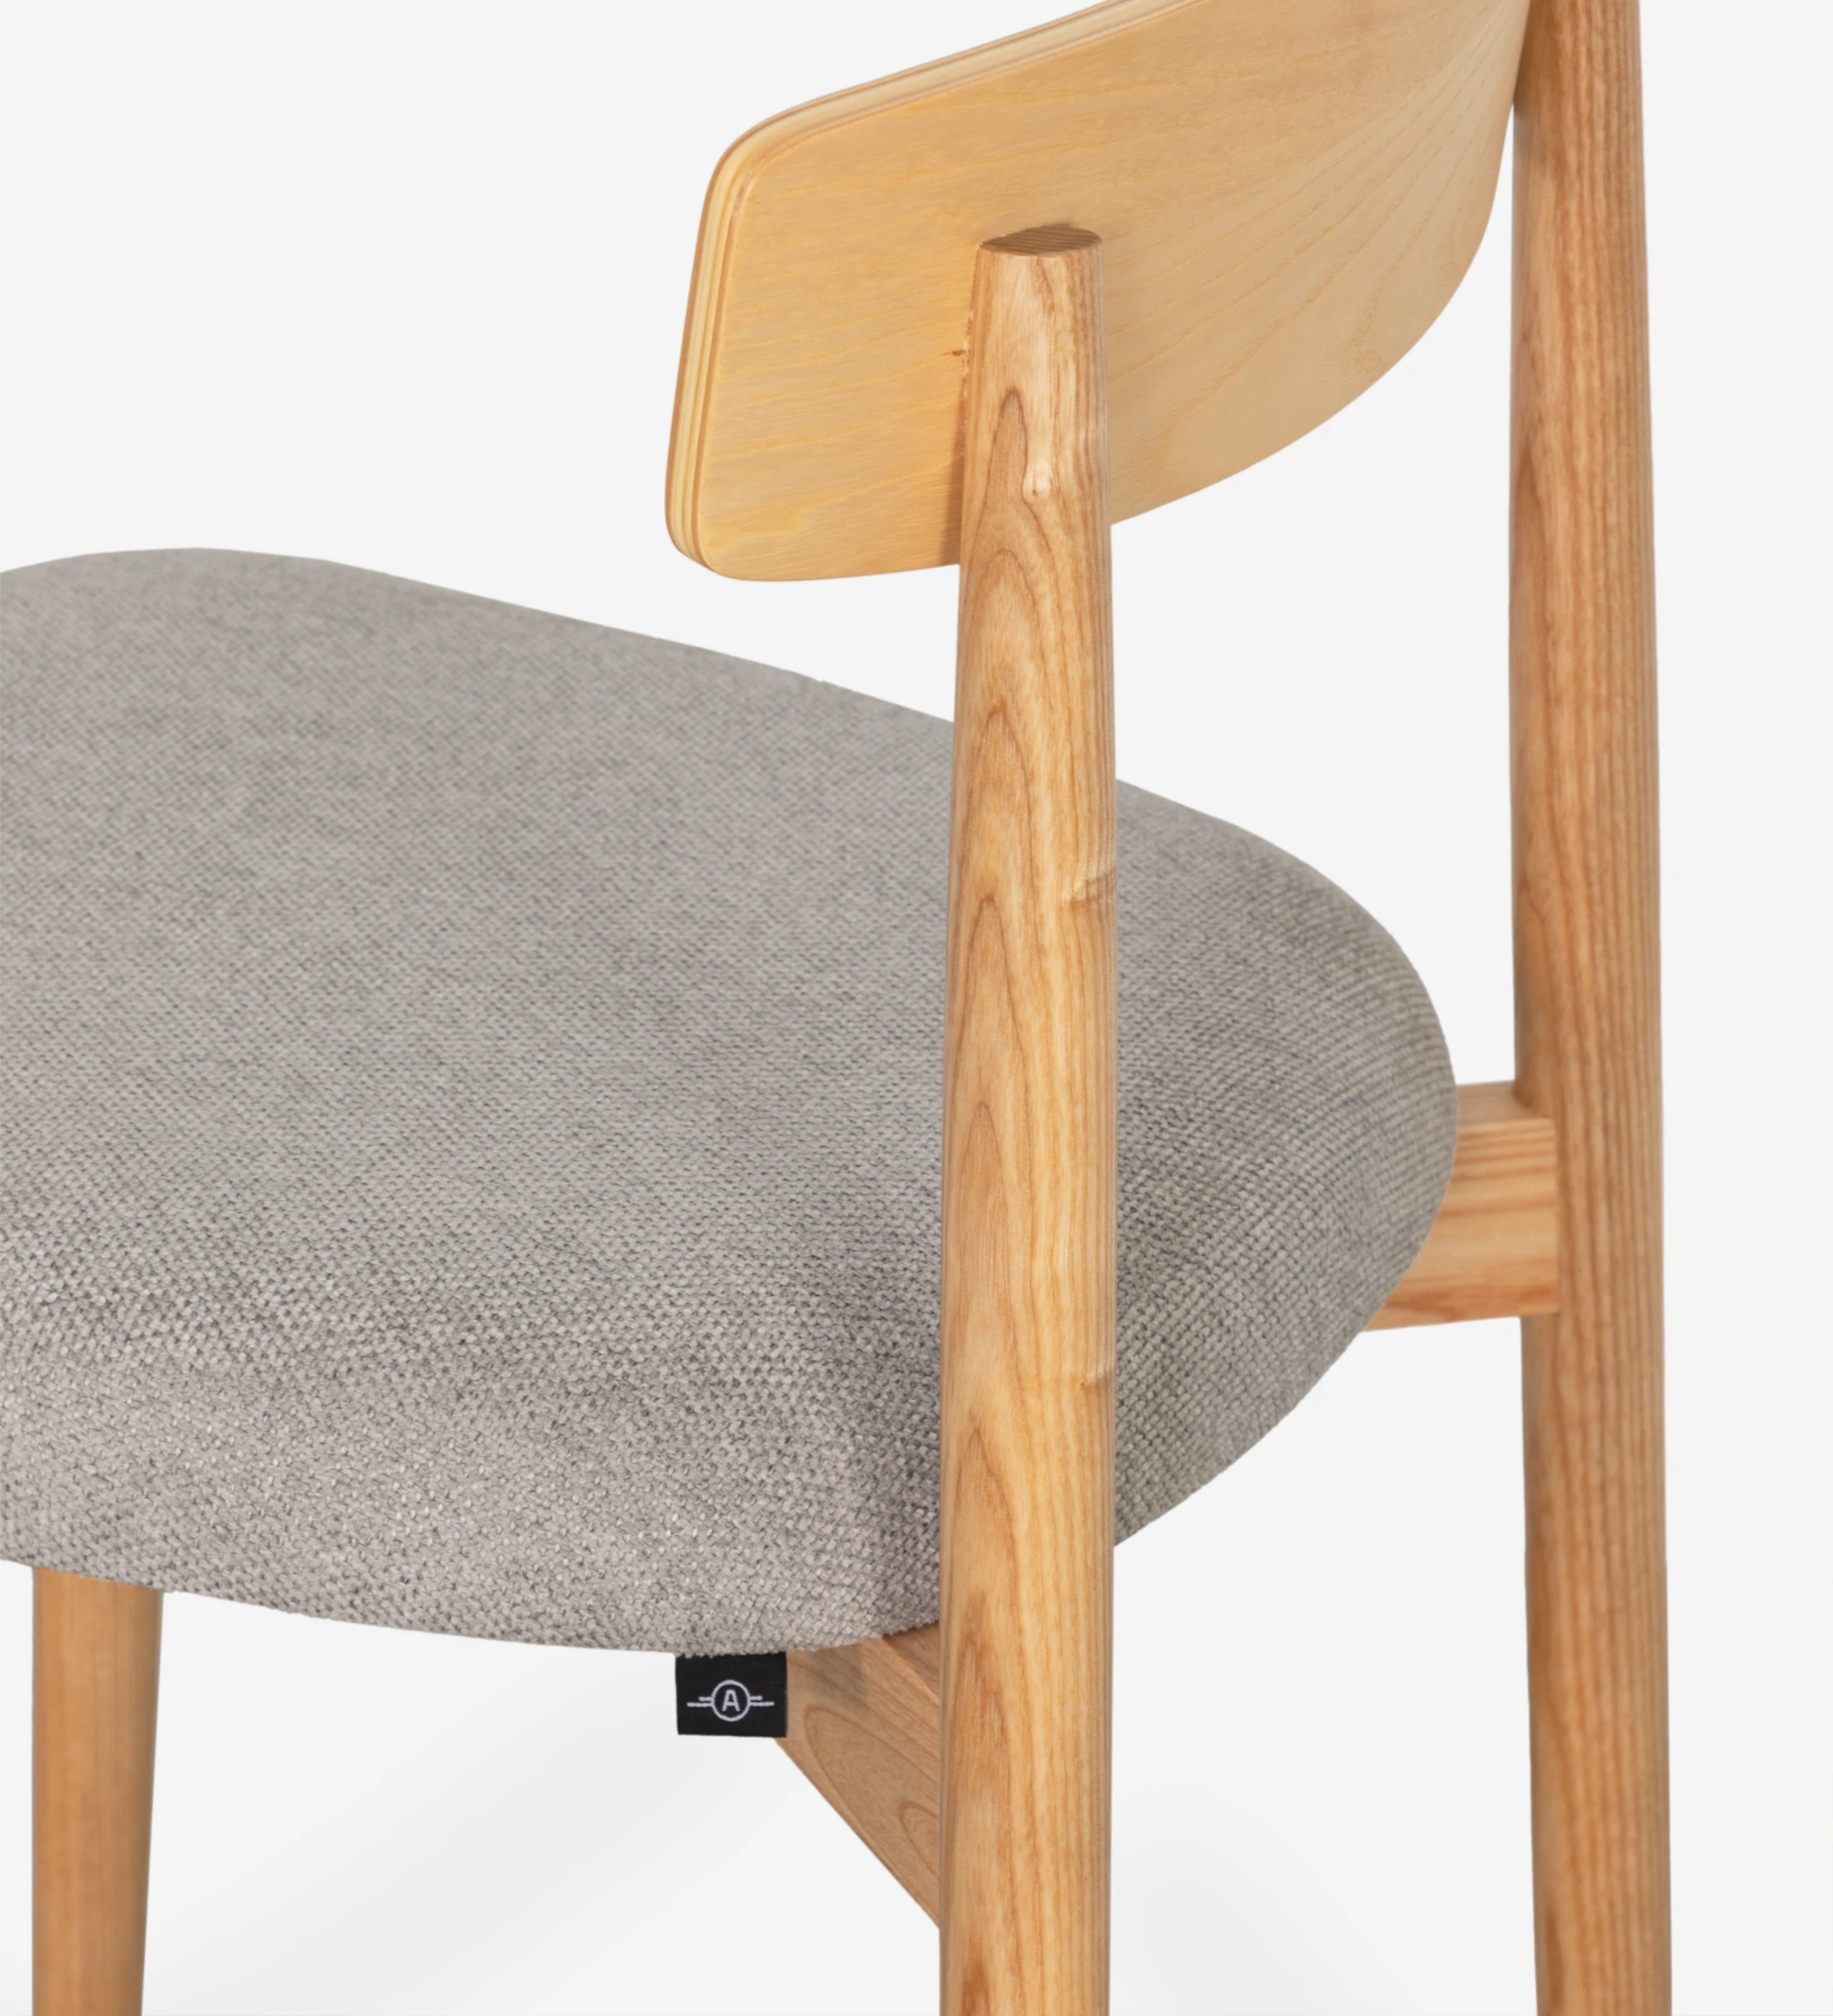 Wenge wood chair with fabric upholstered seat